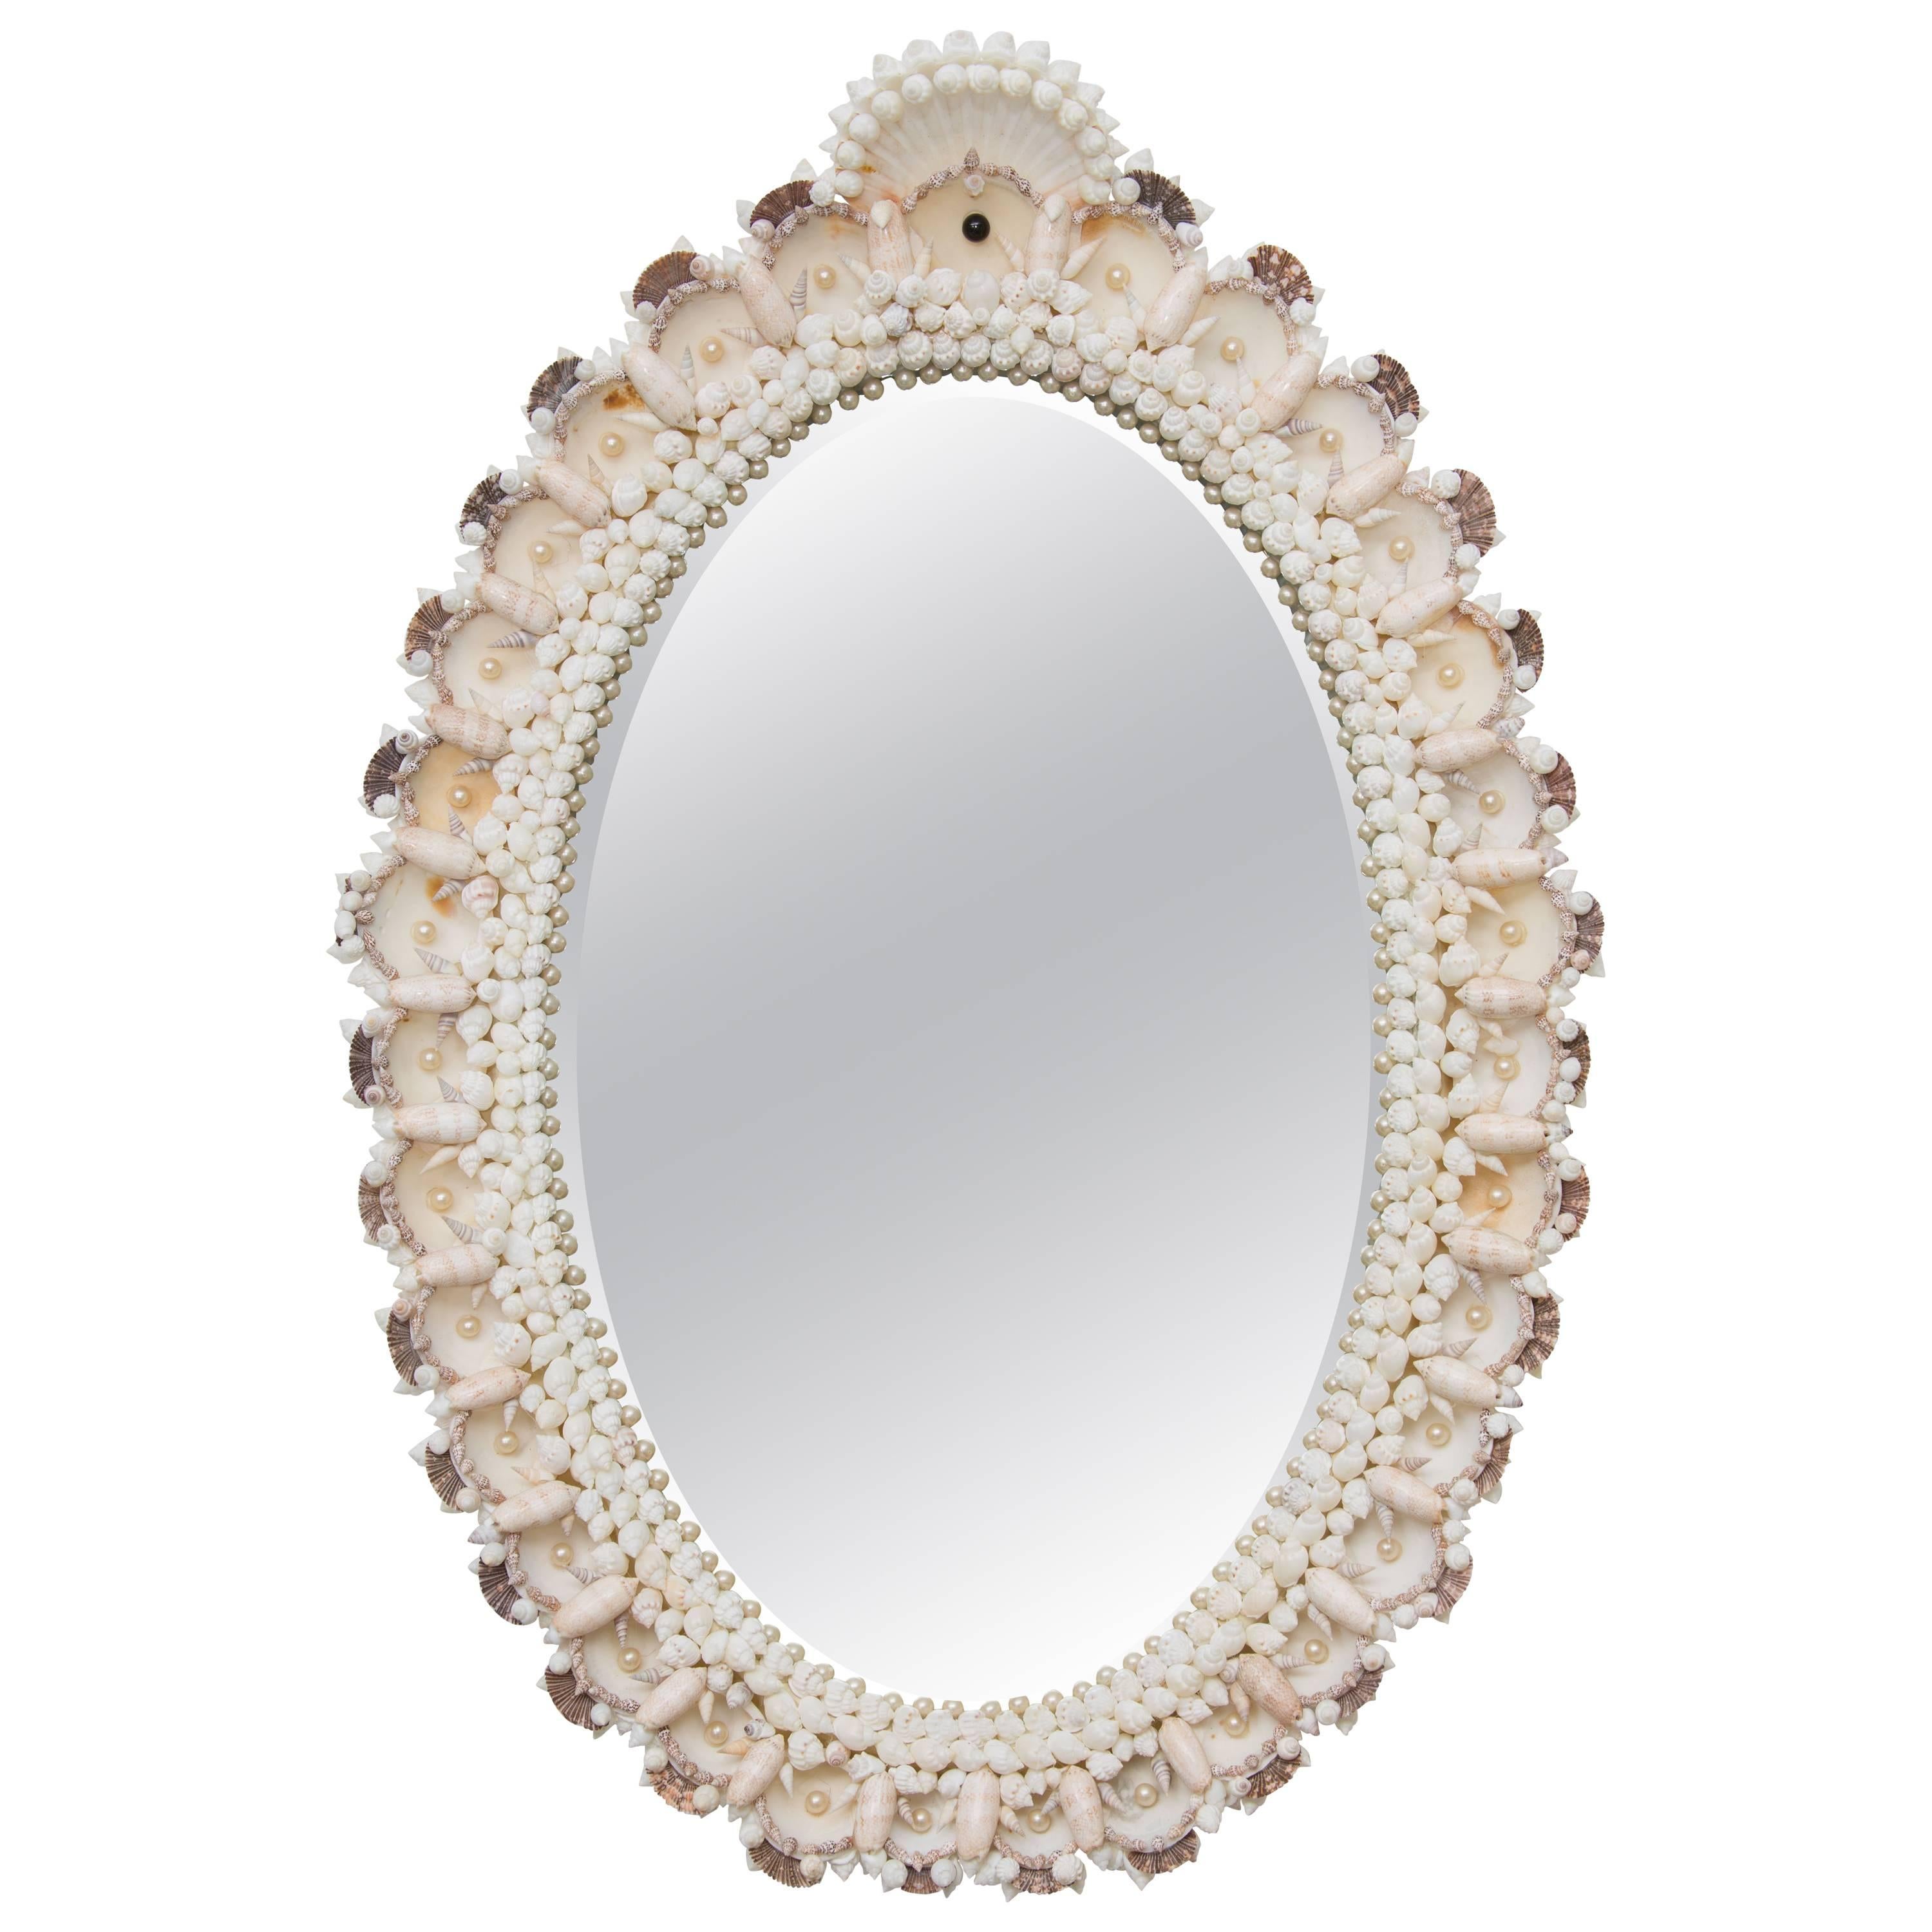 Custom Oval Mirror with Shell-Encrusted Frame